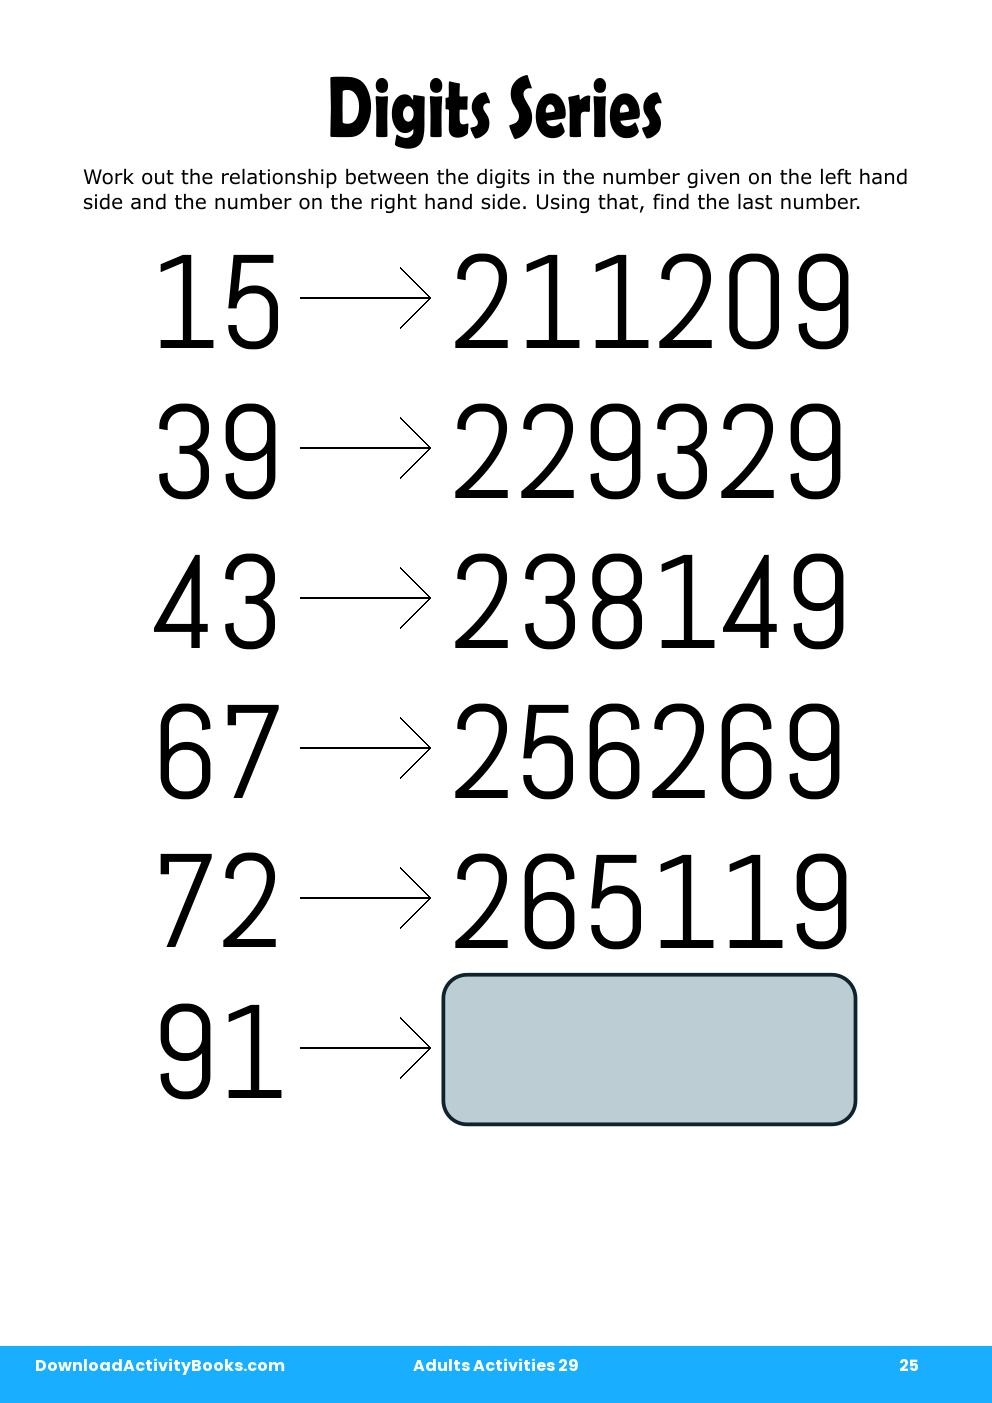 Digits Series in Adults Activities 29